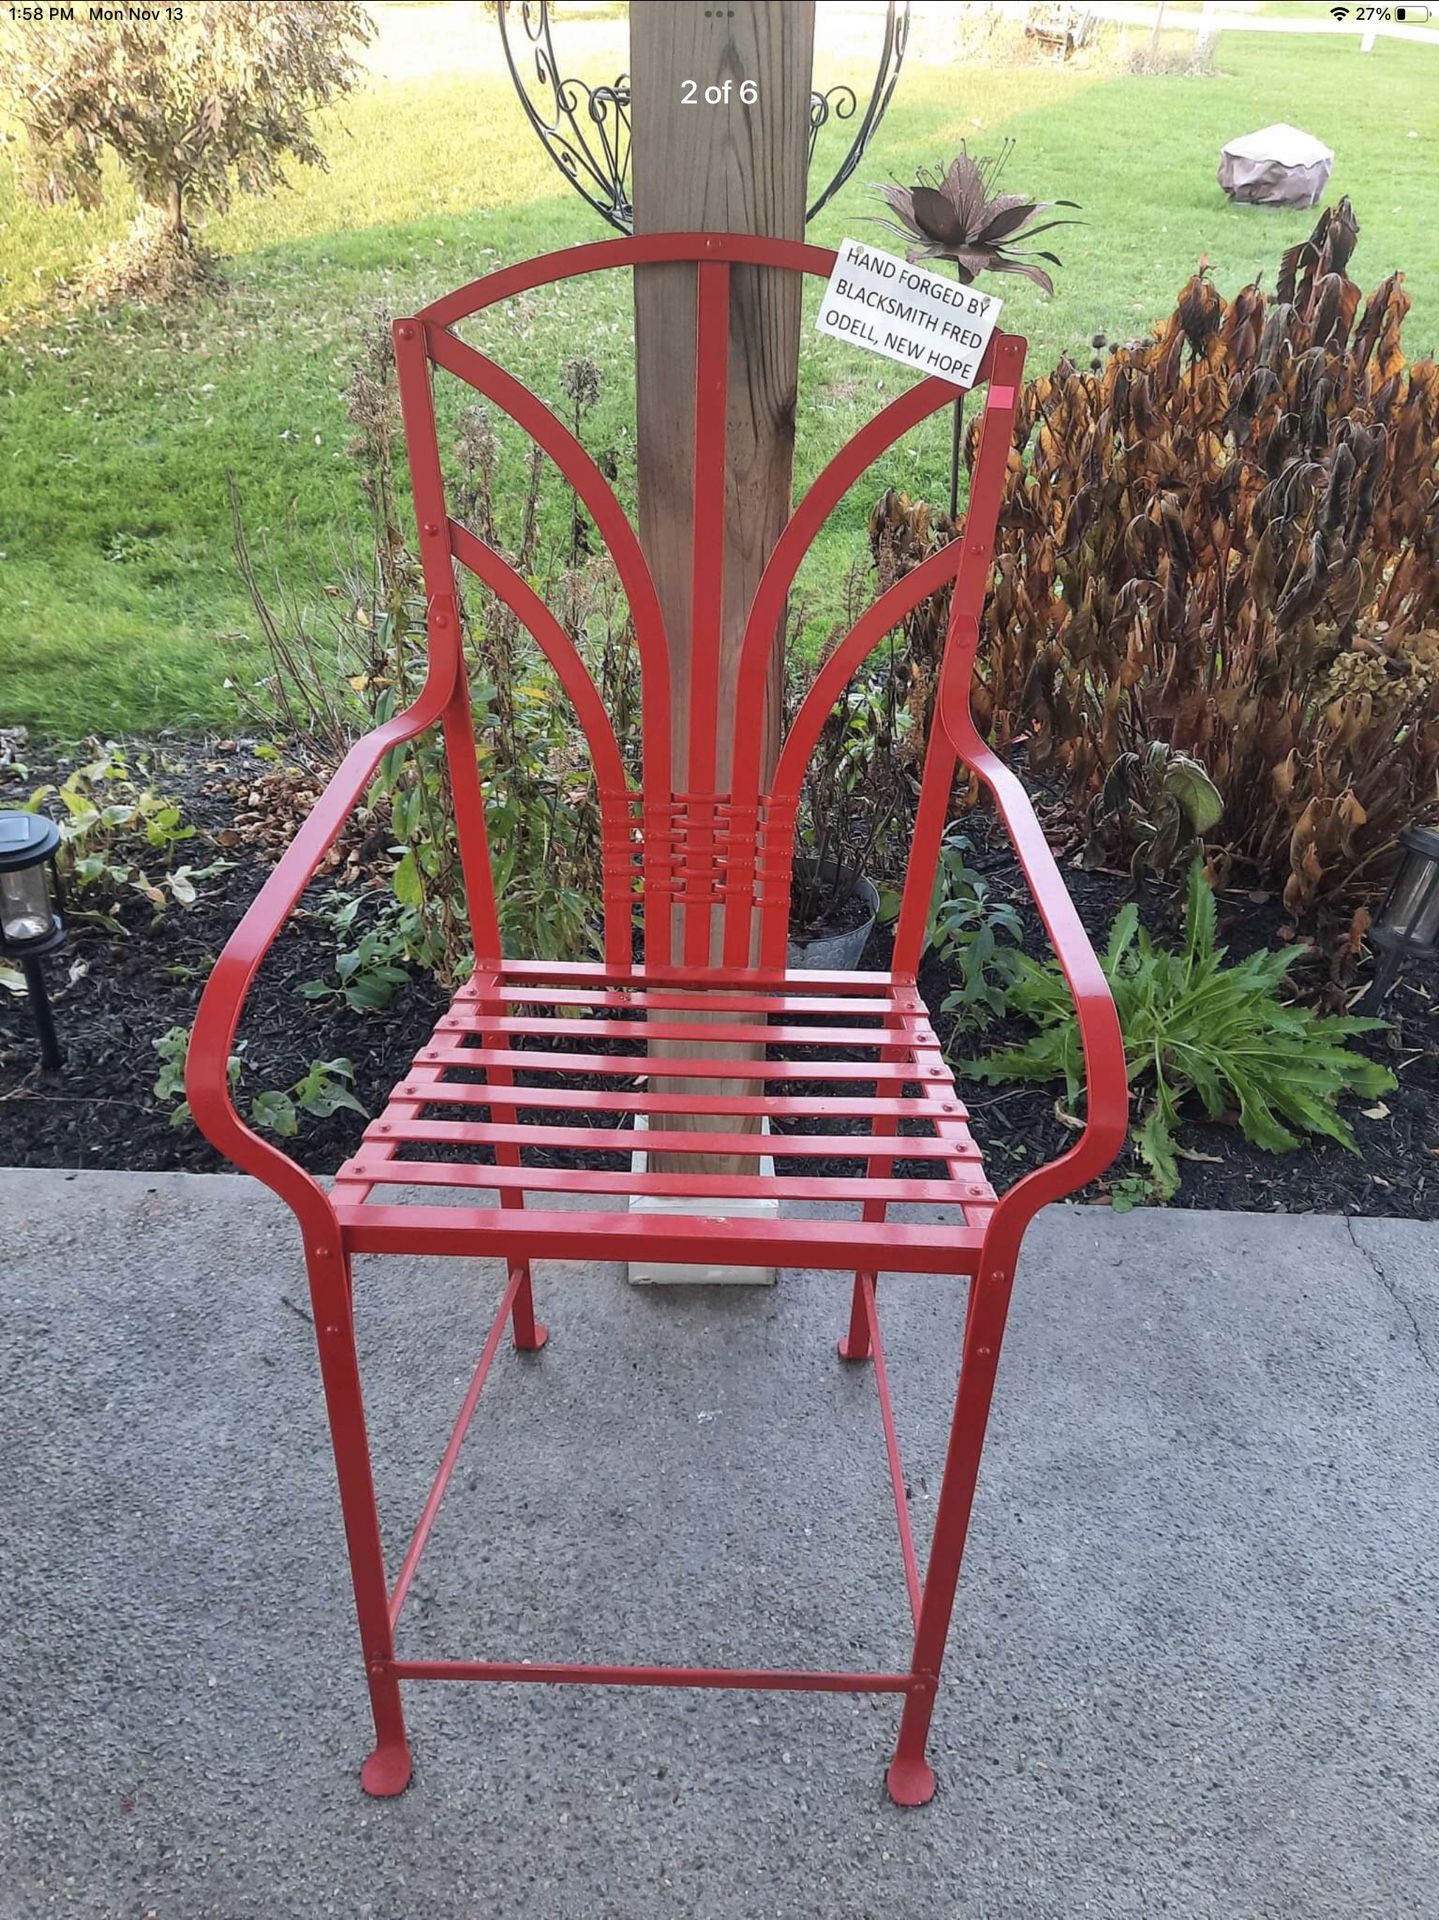 New Hope Craftsman wrought iron chair